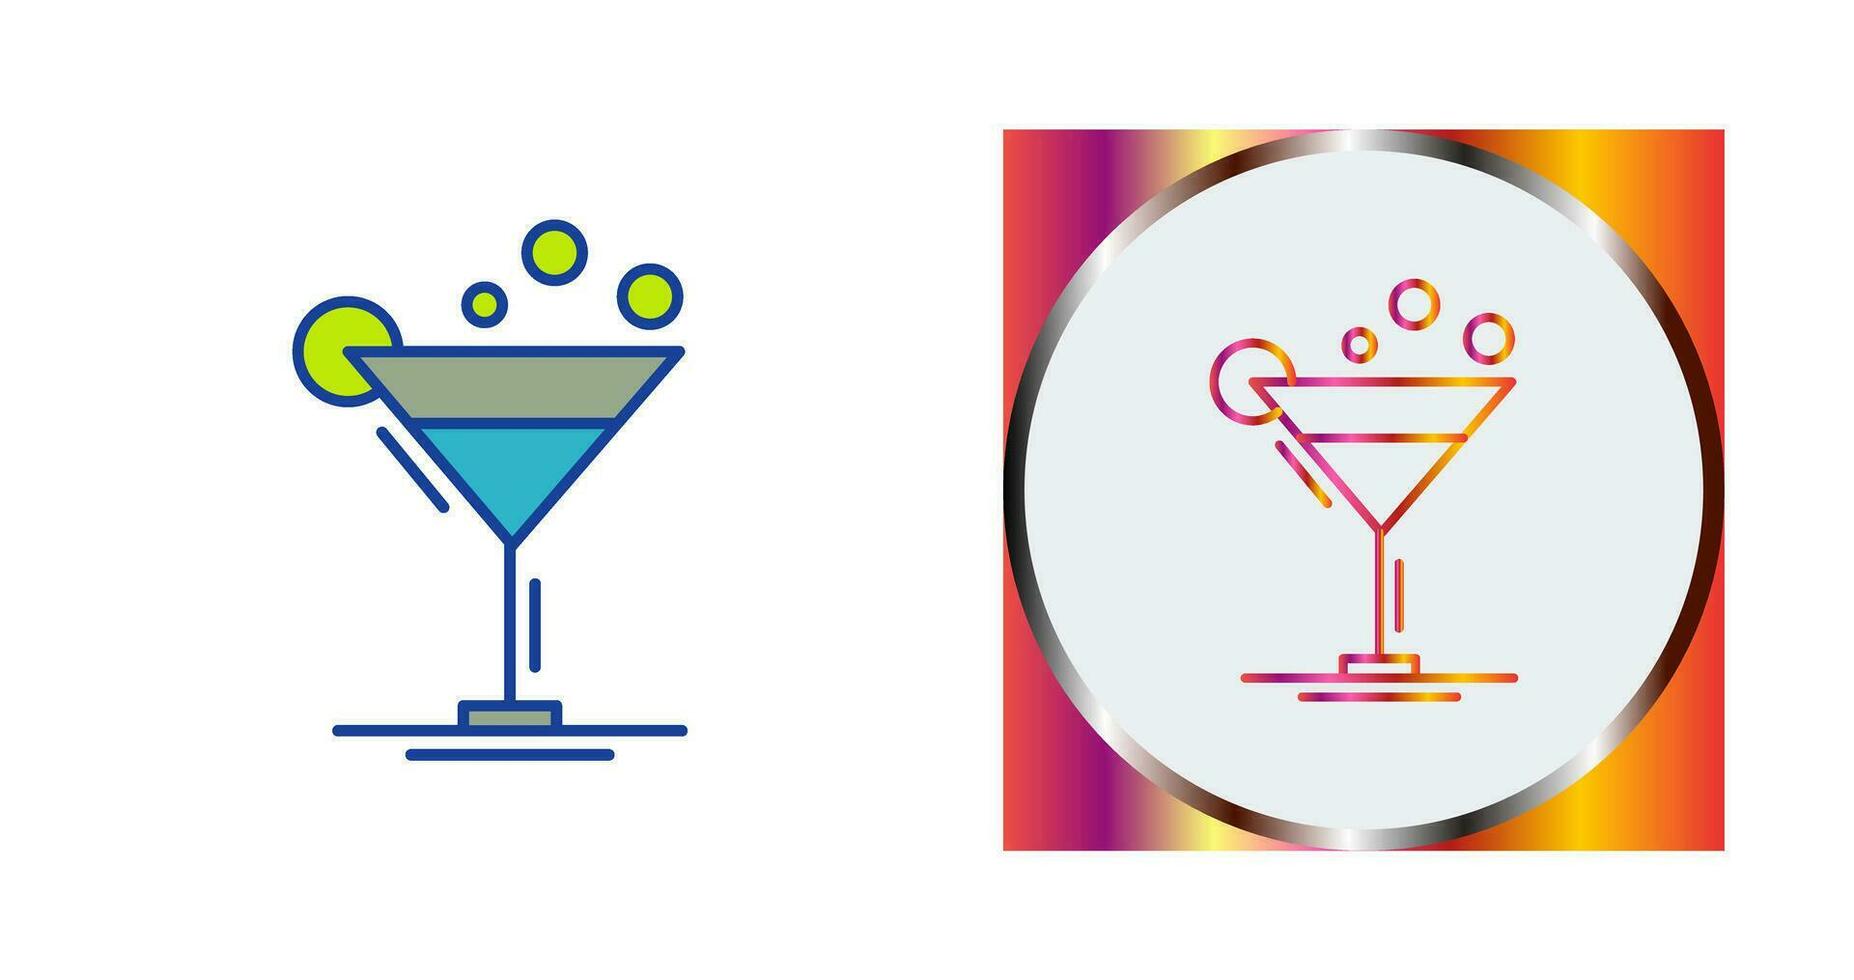 cocktail vector pictogram